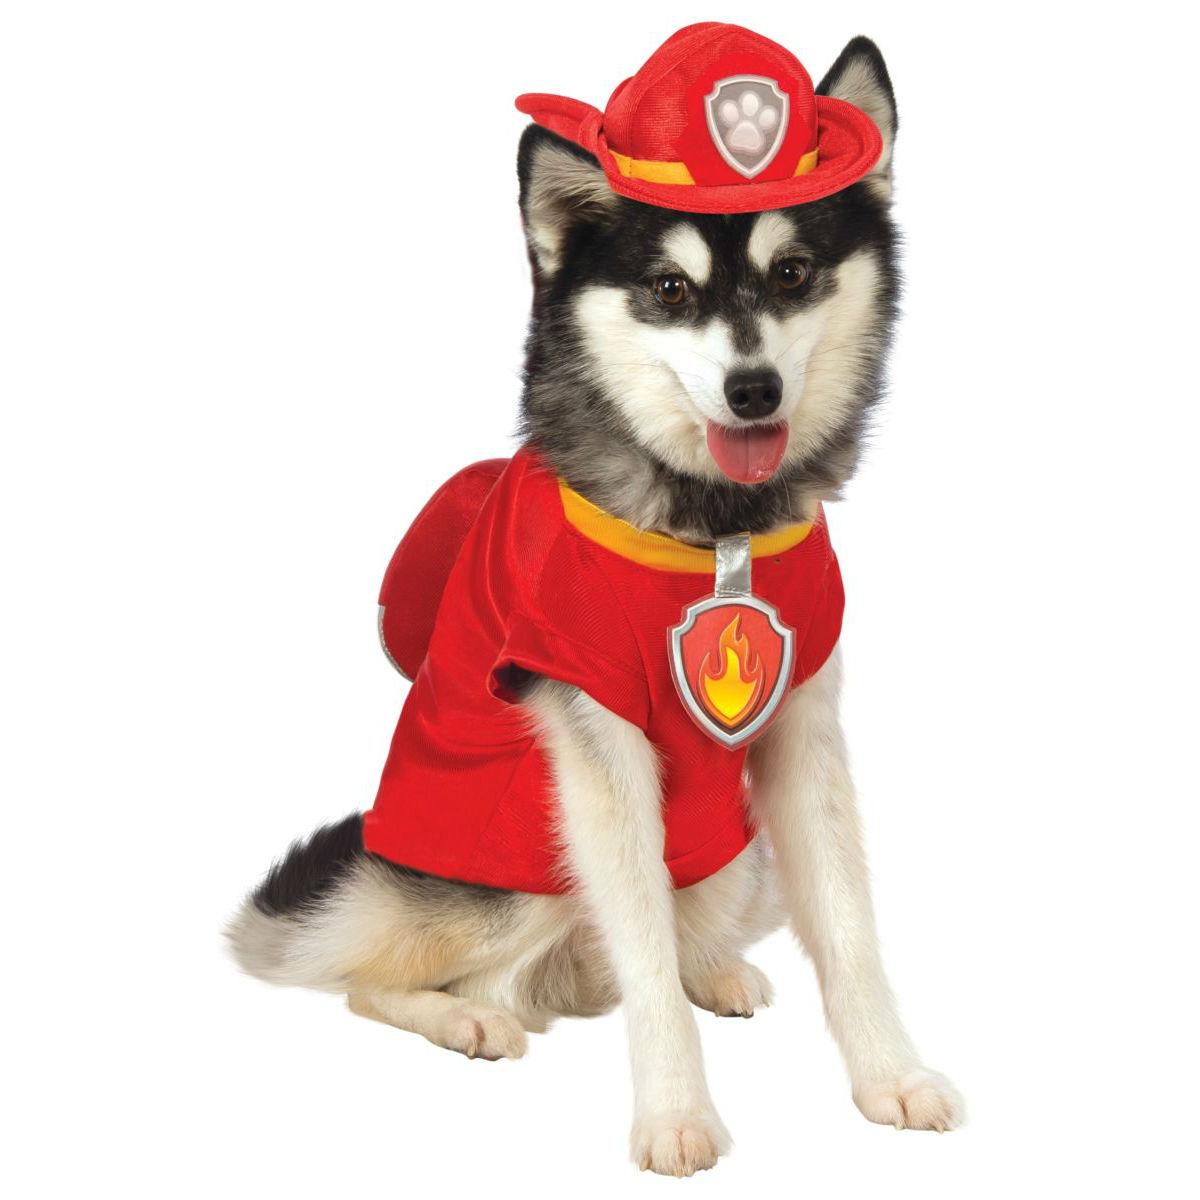 Paw Patrol Marshall The Fire Dog Pet Costume by Rubies